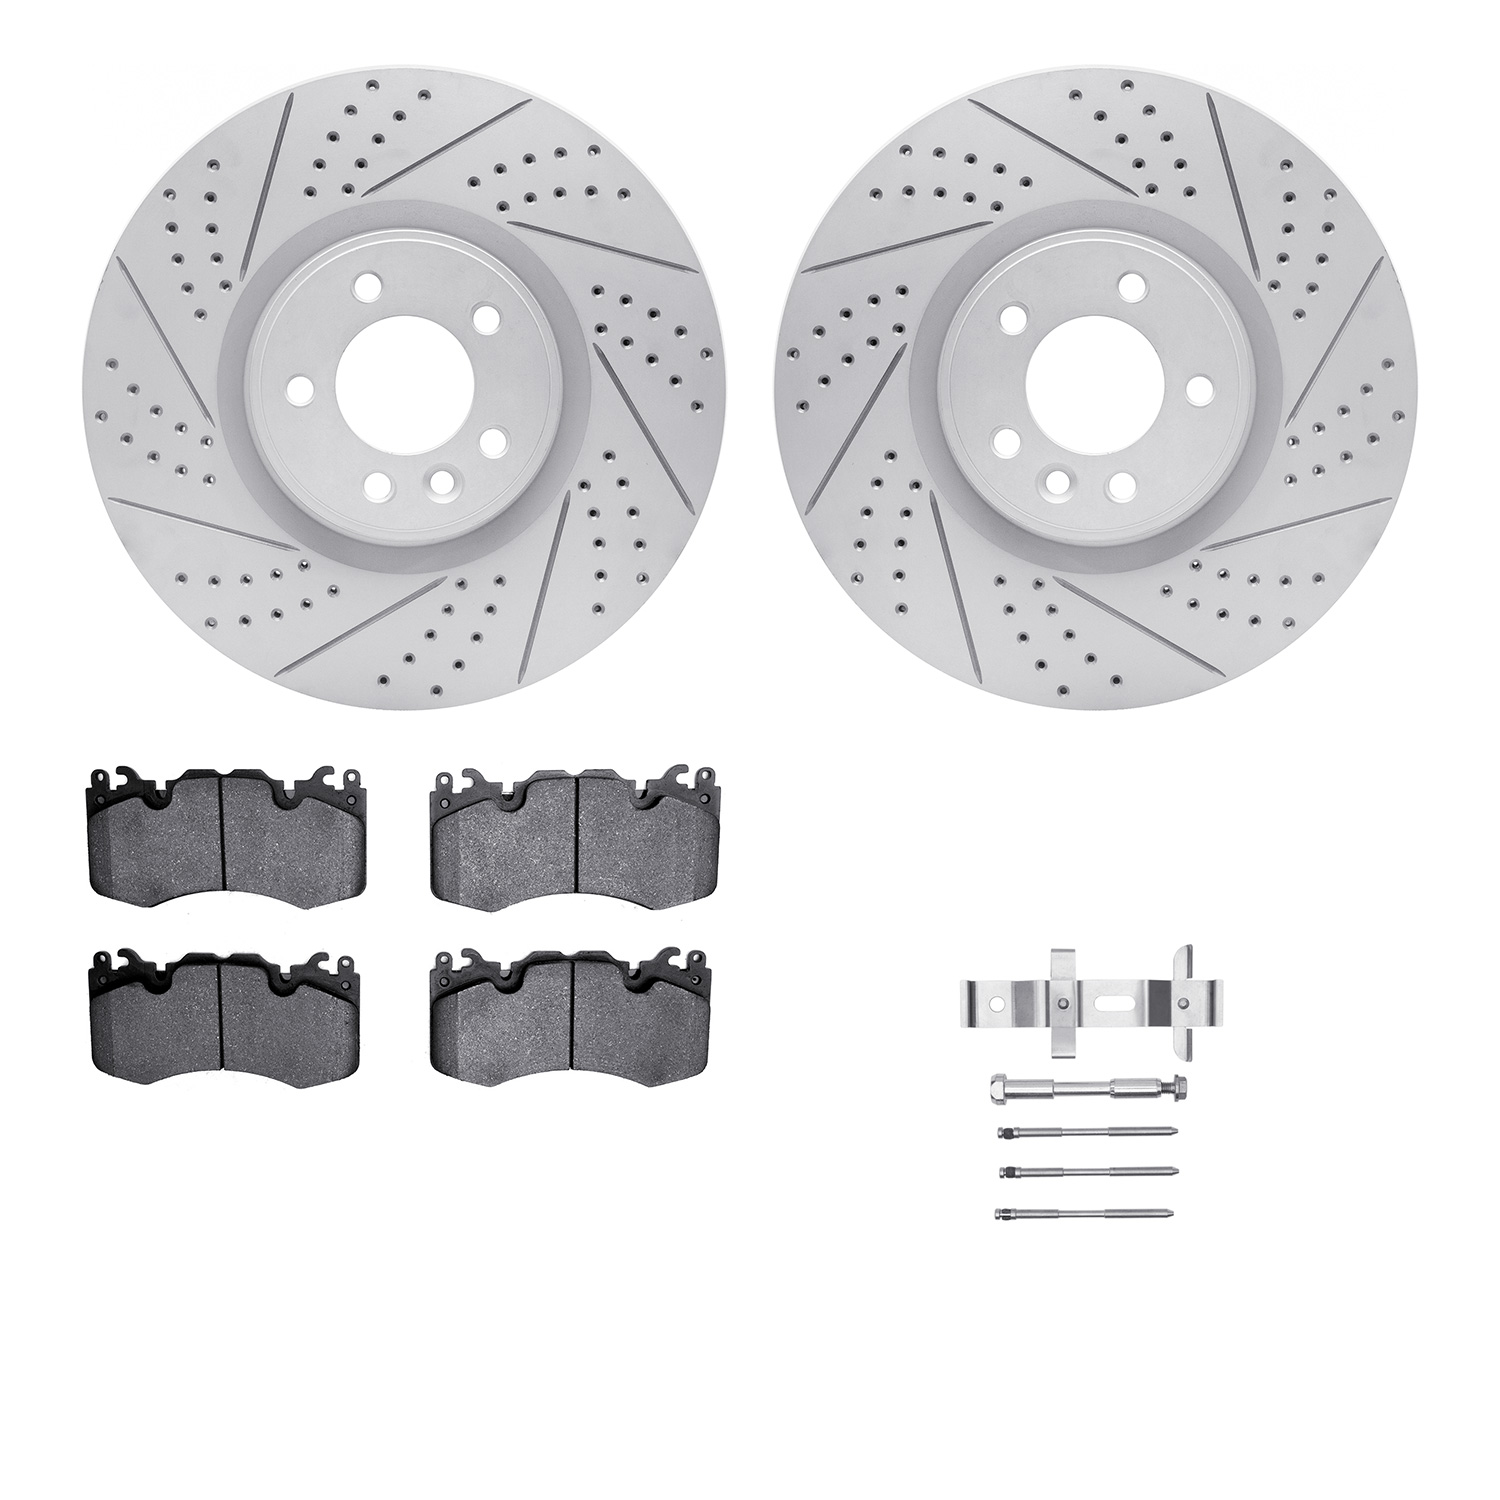 2512-11094 Geoperformance Drilled/Slotted Rotors w/5000 Advanced Brake Pads Kit & Hardware, 2010-2017 Land Rover, Position: Fron